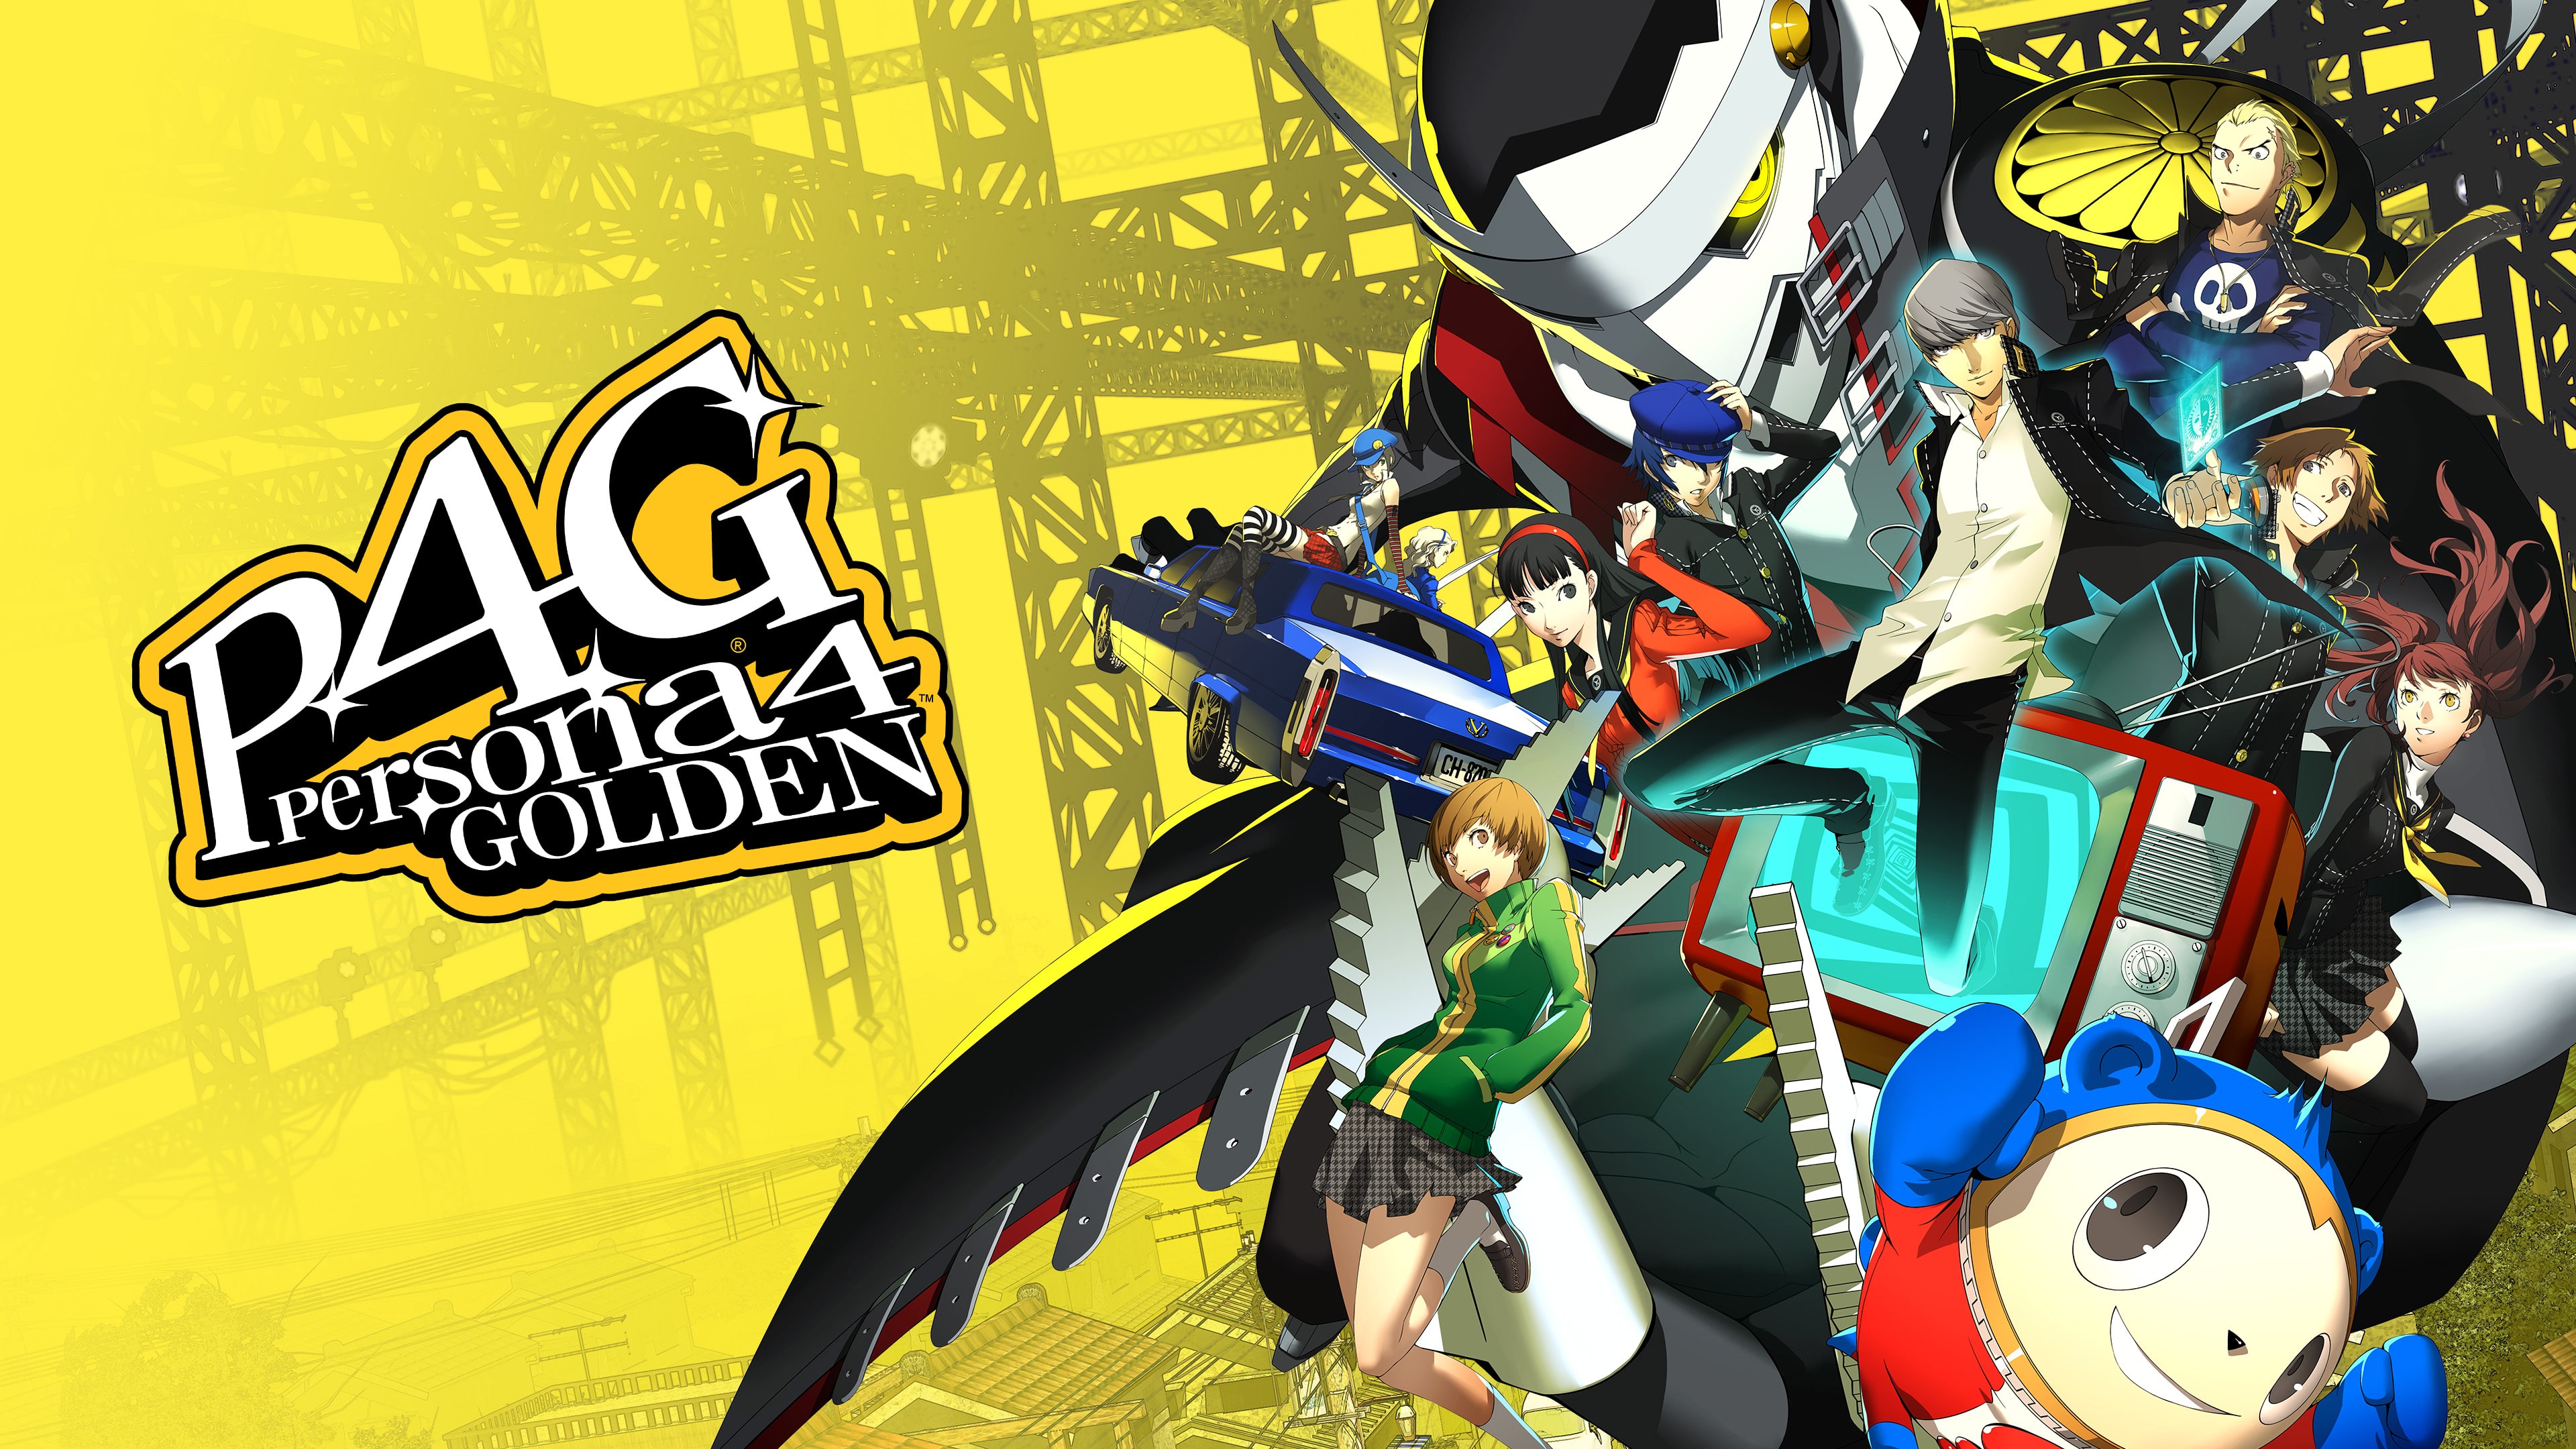 Persona 4 Golden (Simplified Chinese, English, Korean, Japanese, Traditional Chinese)